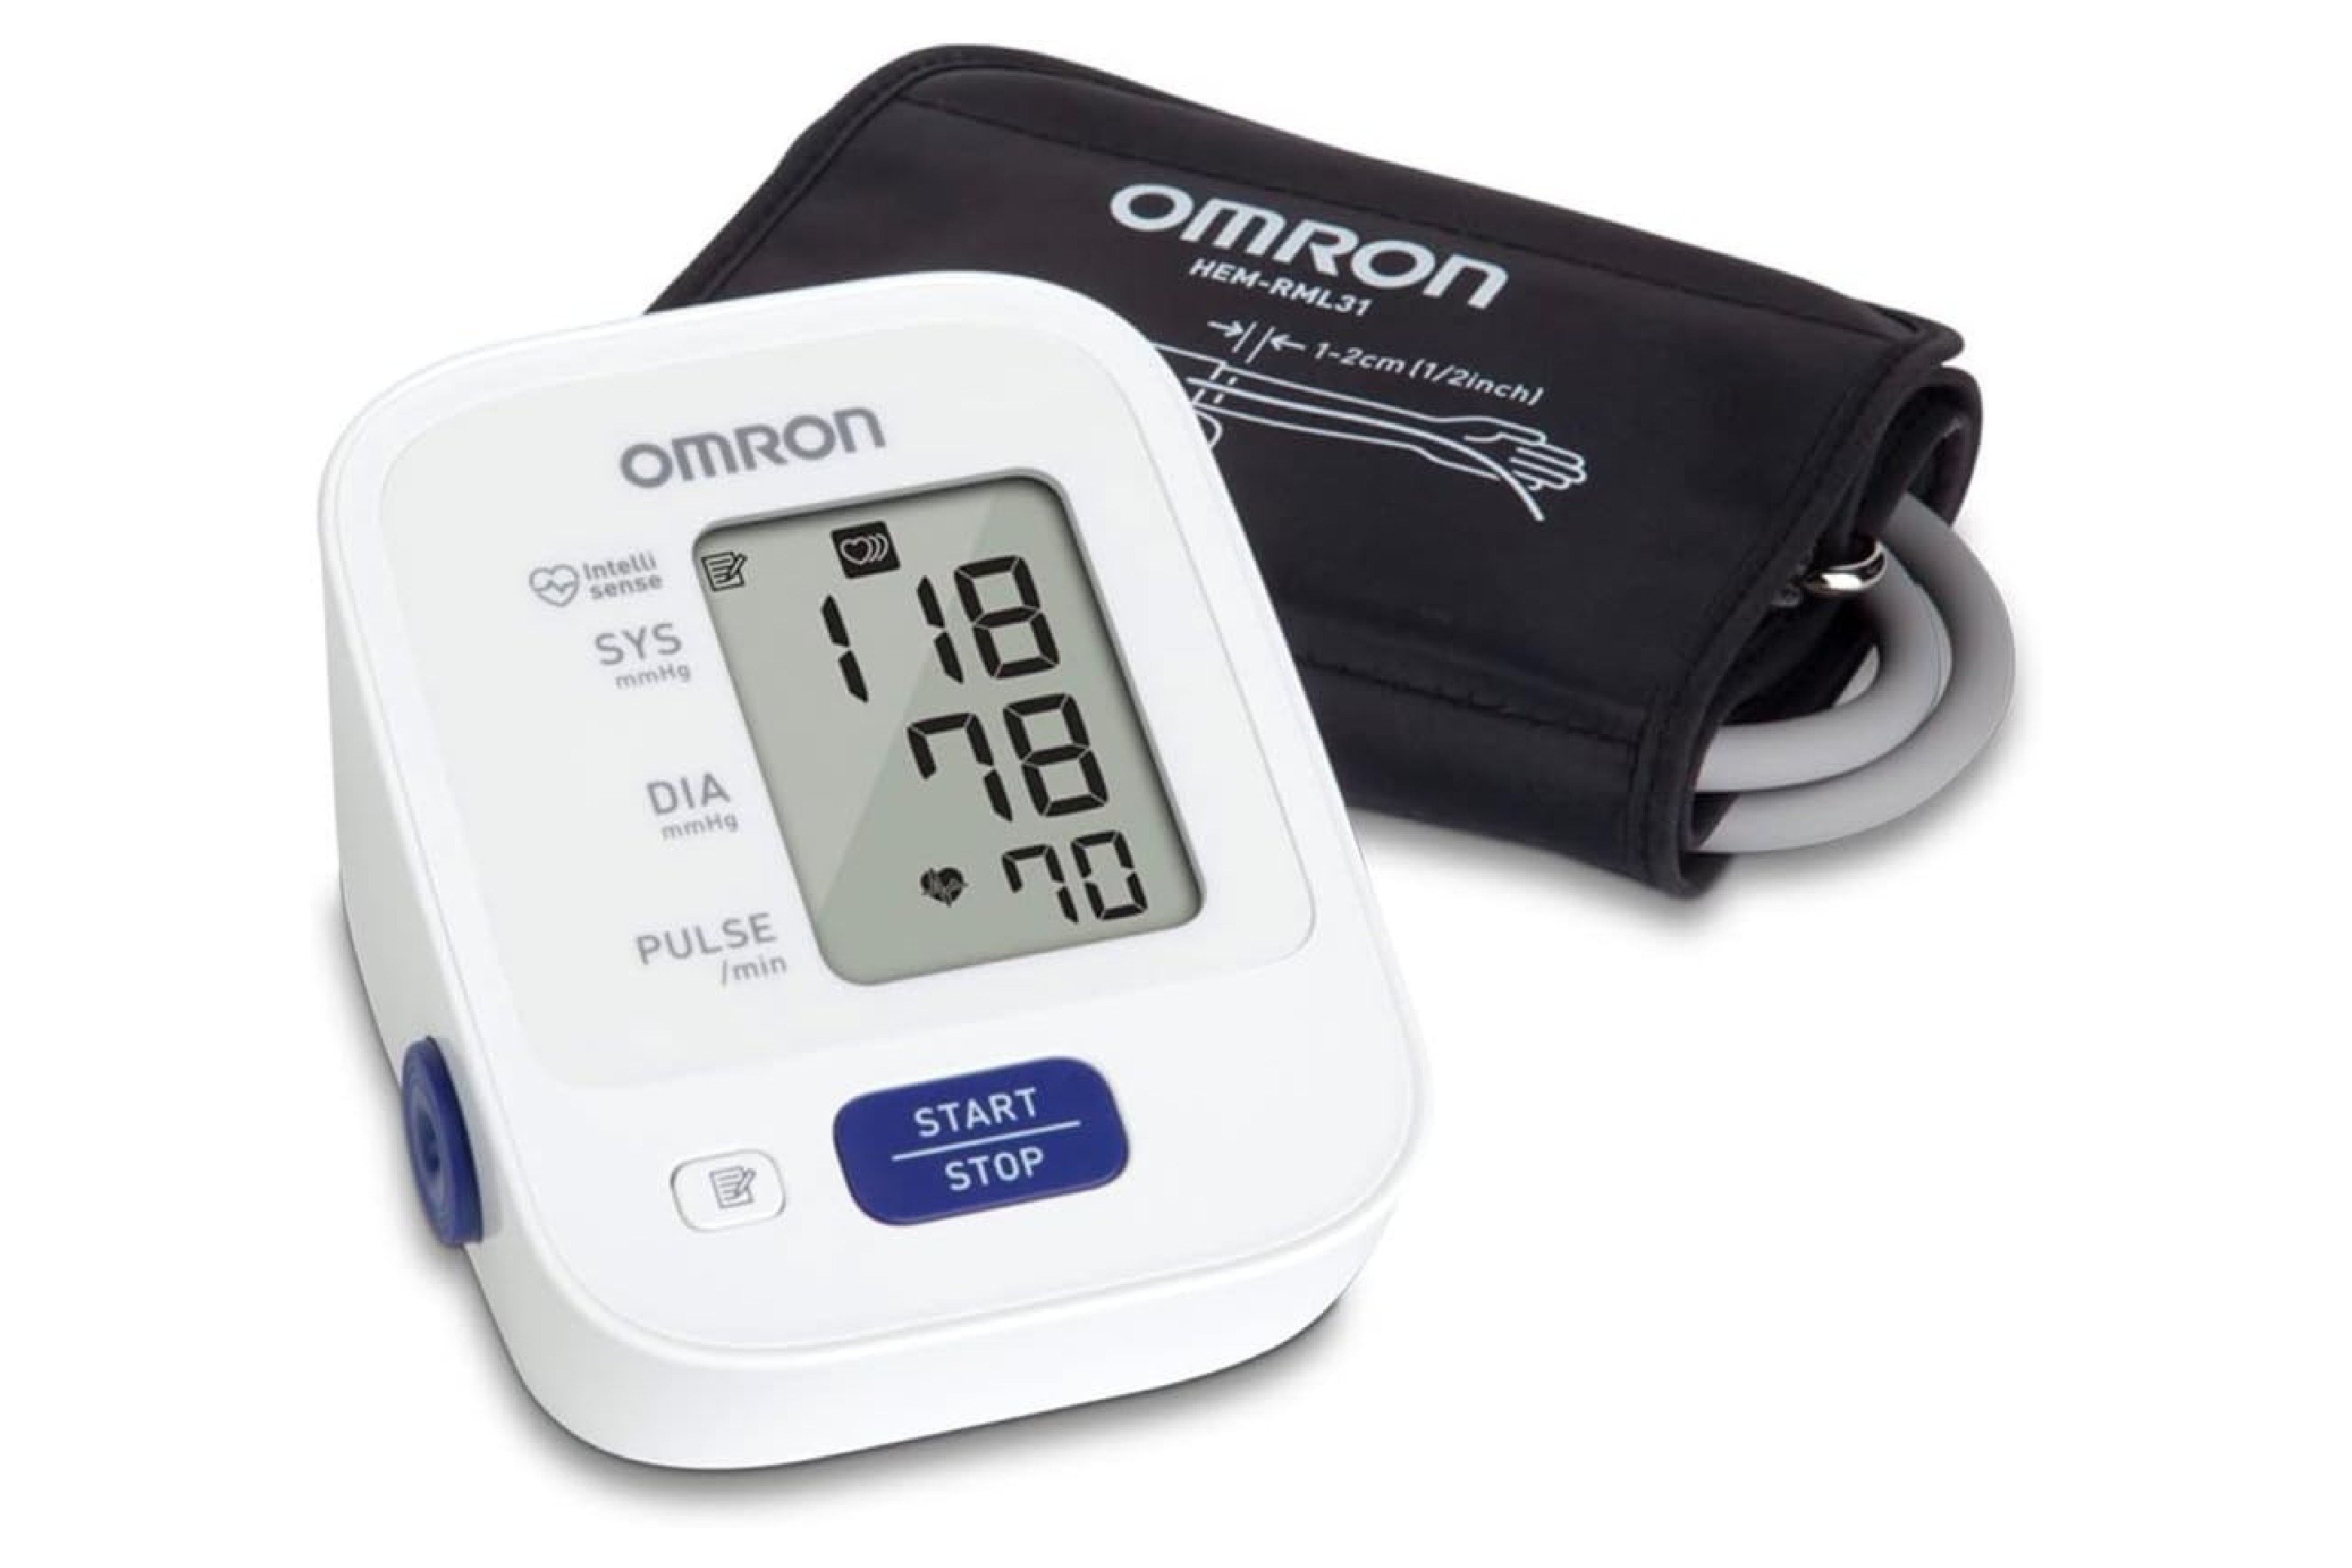 Omron BP5100 Blood Pressure Monitor for Home